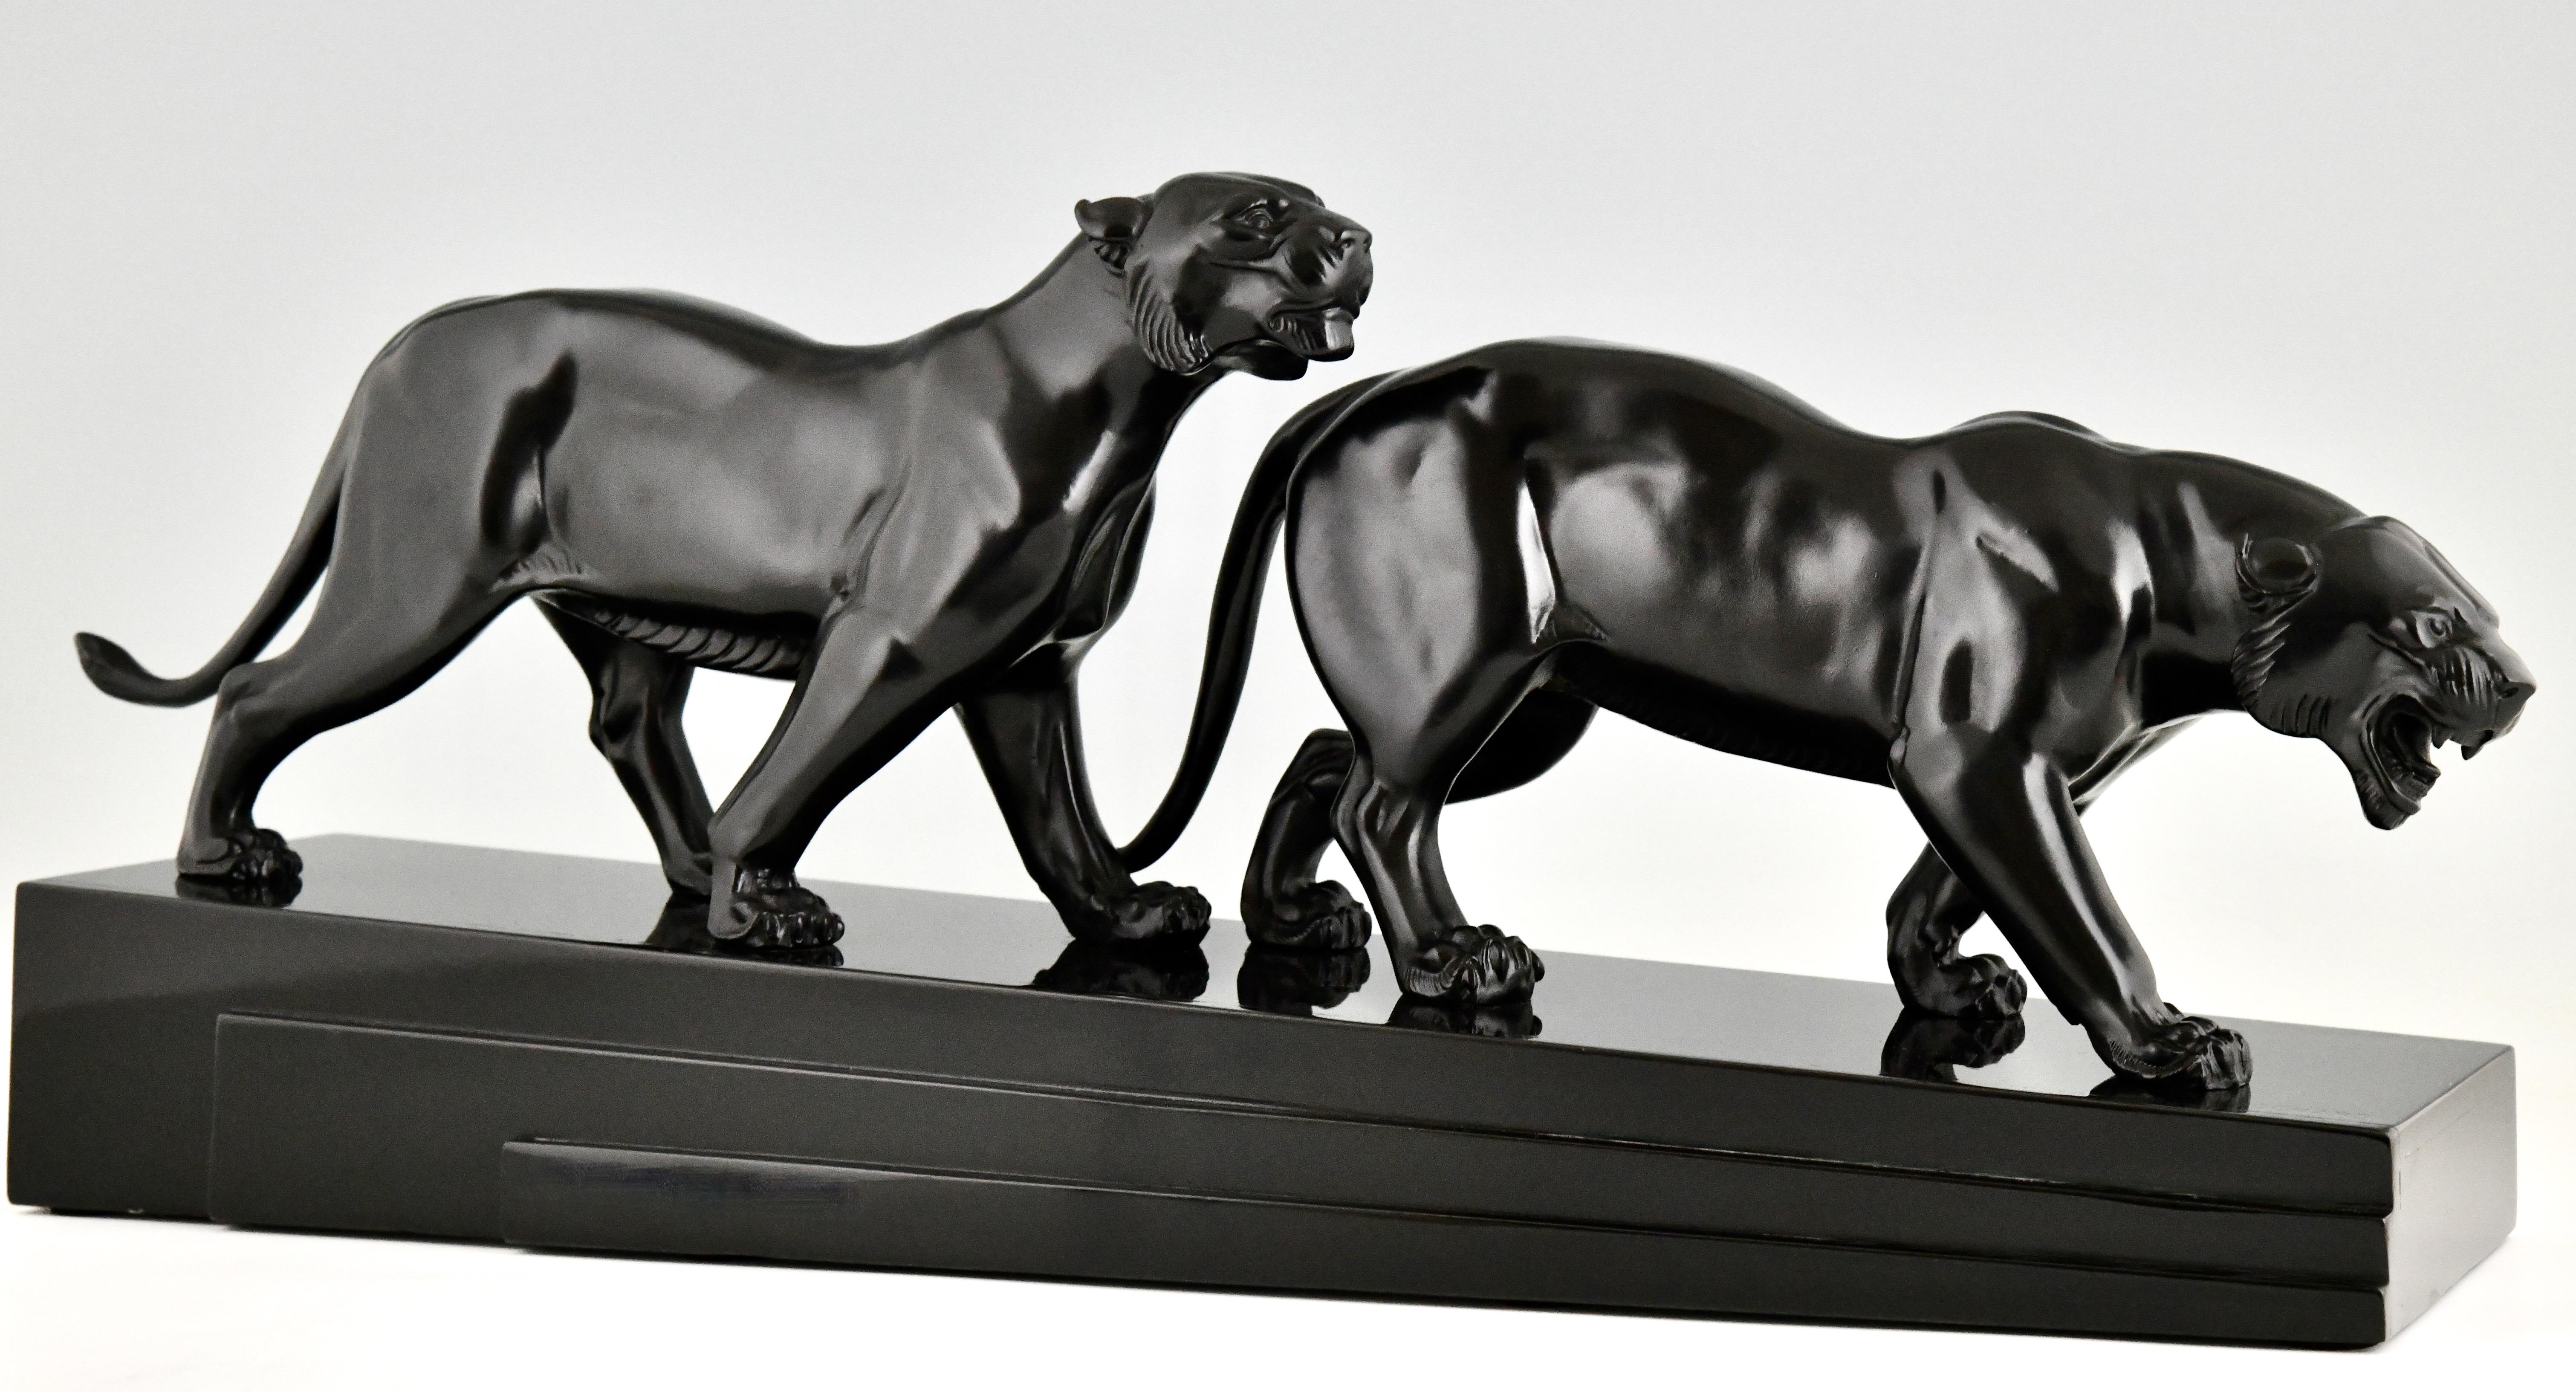 Art Deco sculpture two panthers signed by Irene Rochard. 
Patinated Art metal on a Belgian Black marble base. 
France 1930. 
Literature:
Art Deco sculpture two panthers signed by Irene Rochard. 
Patinated Art metal on a Belgian Black marble base.